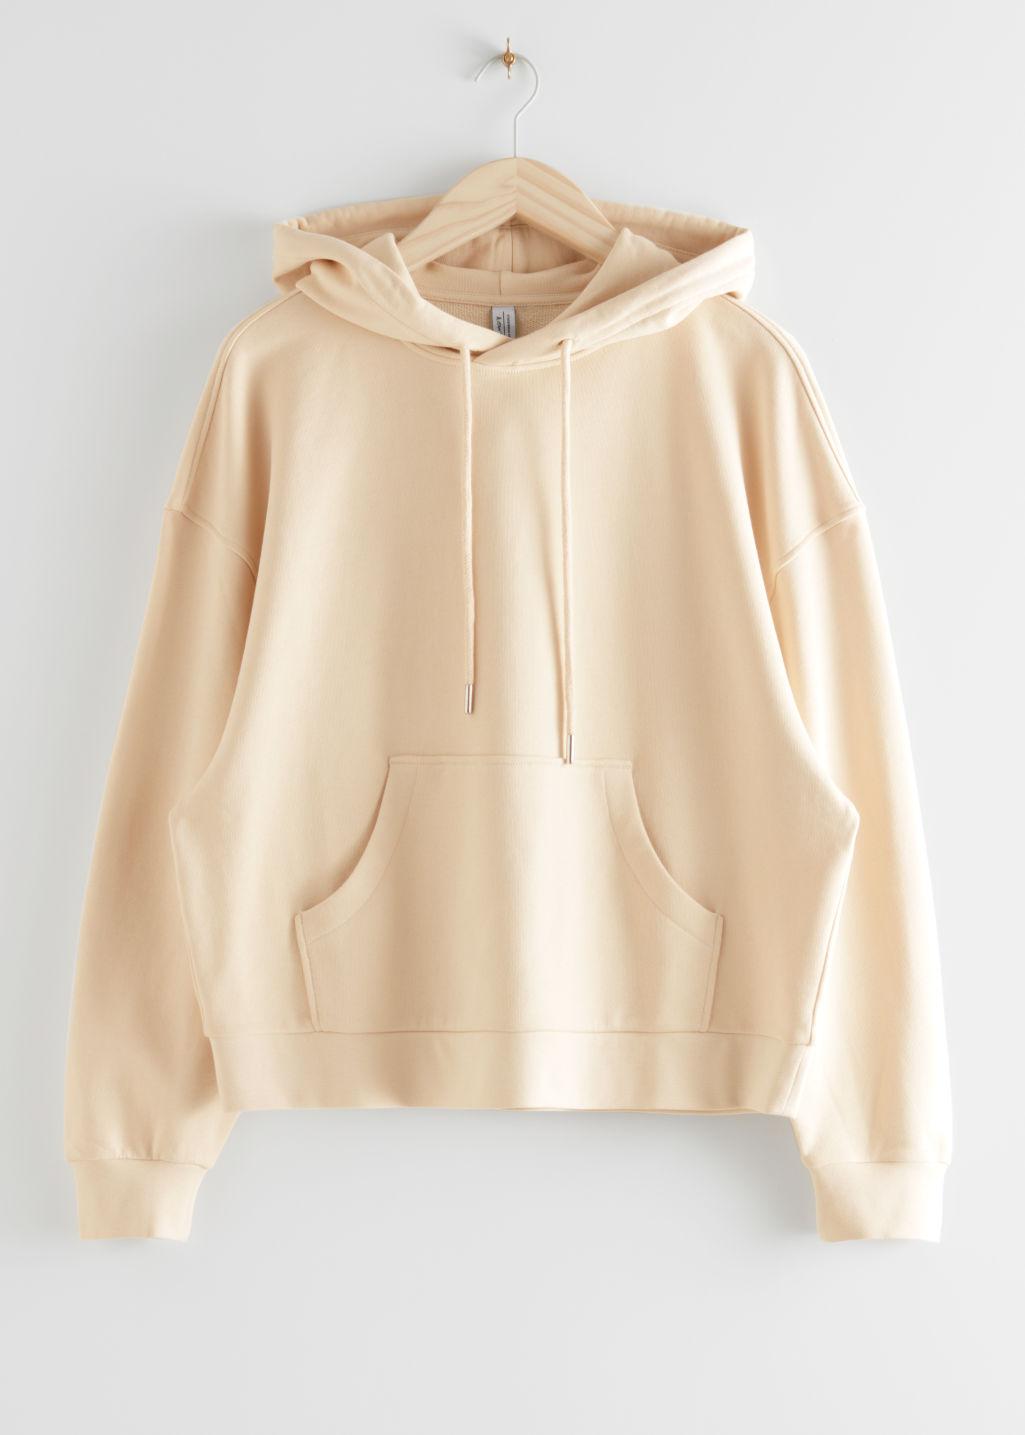 & Other Stories Cotton Oversized Boxy Hooded Sweatshirt in Beige (Natural)  - Lyst